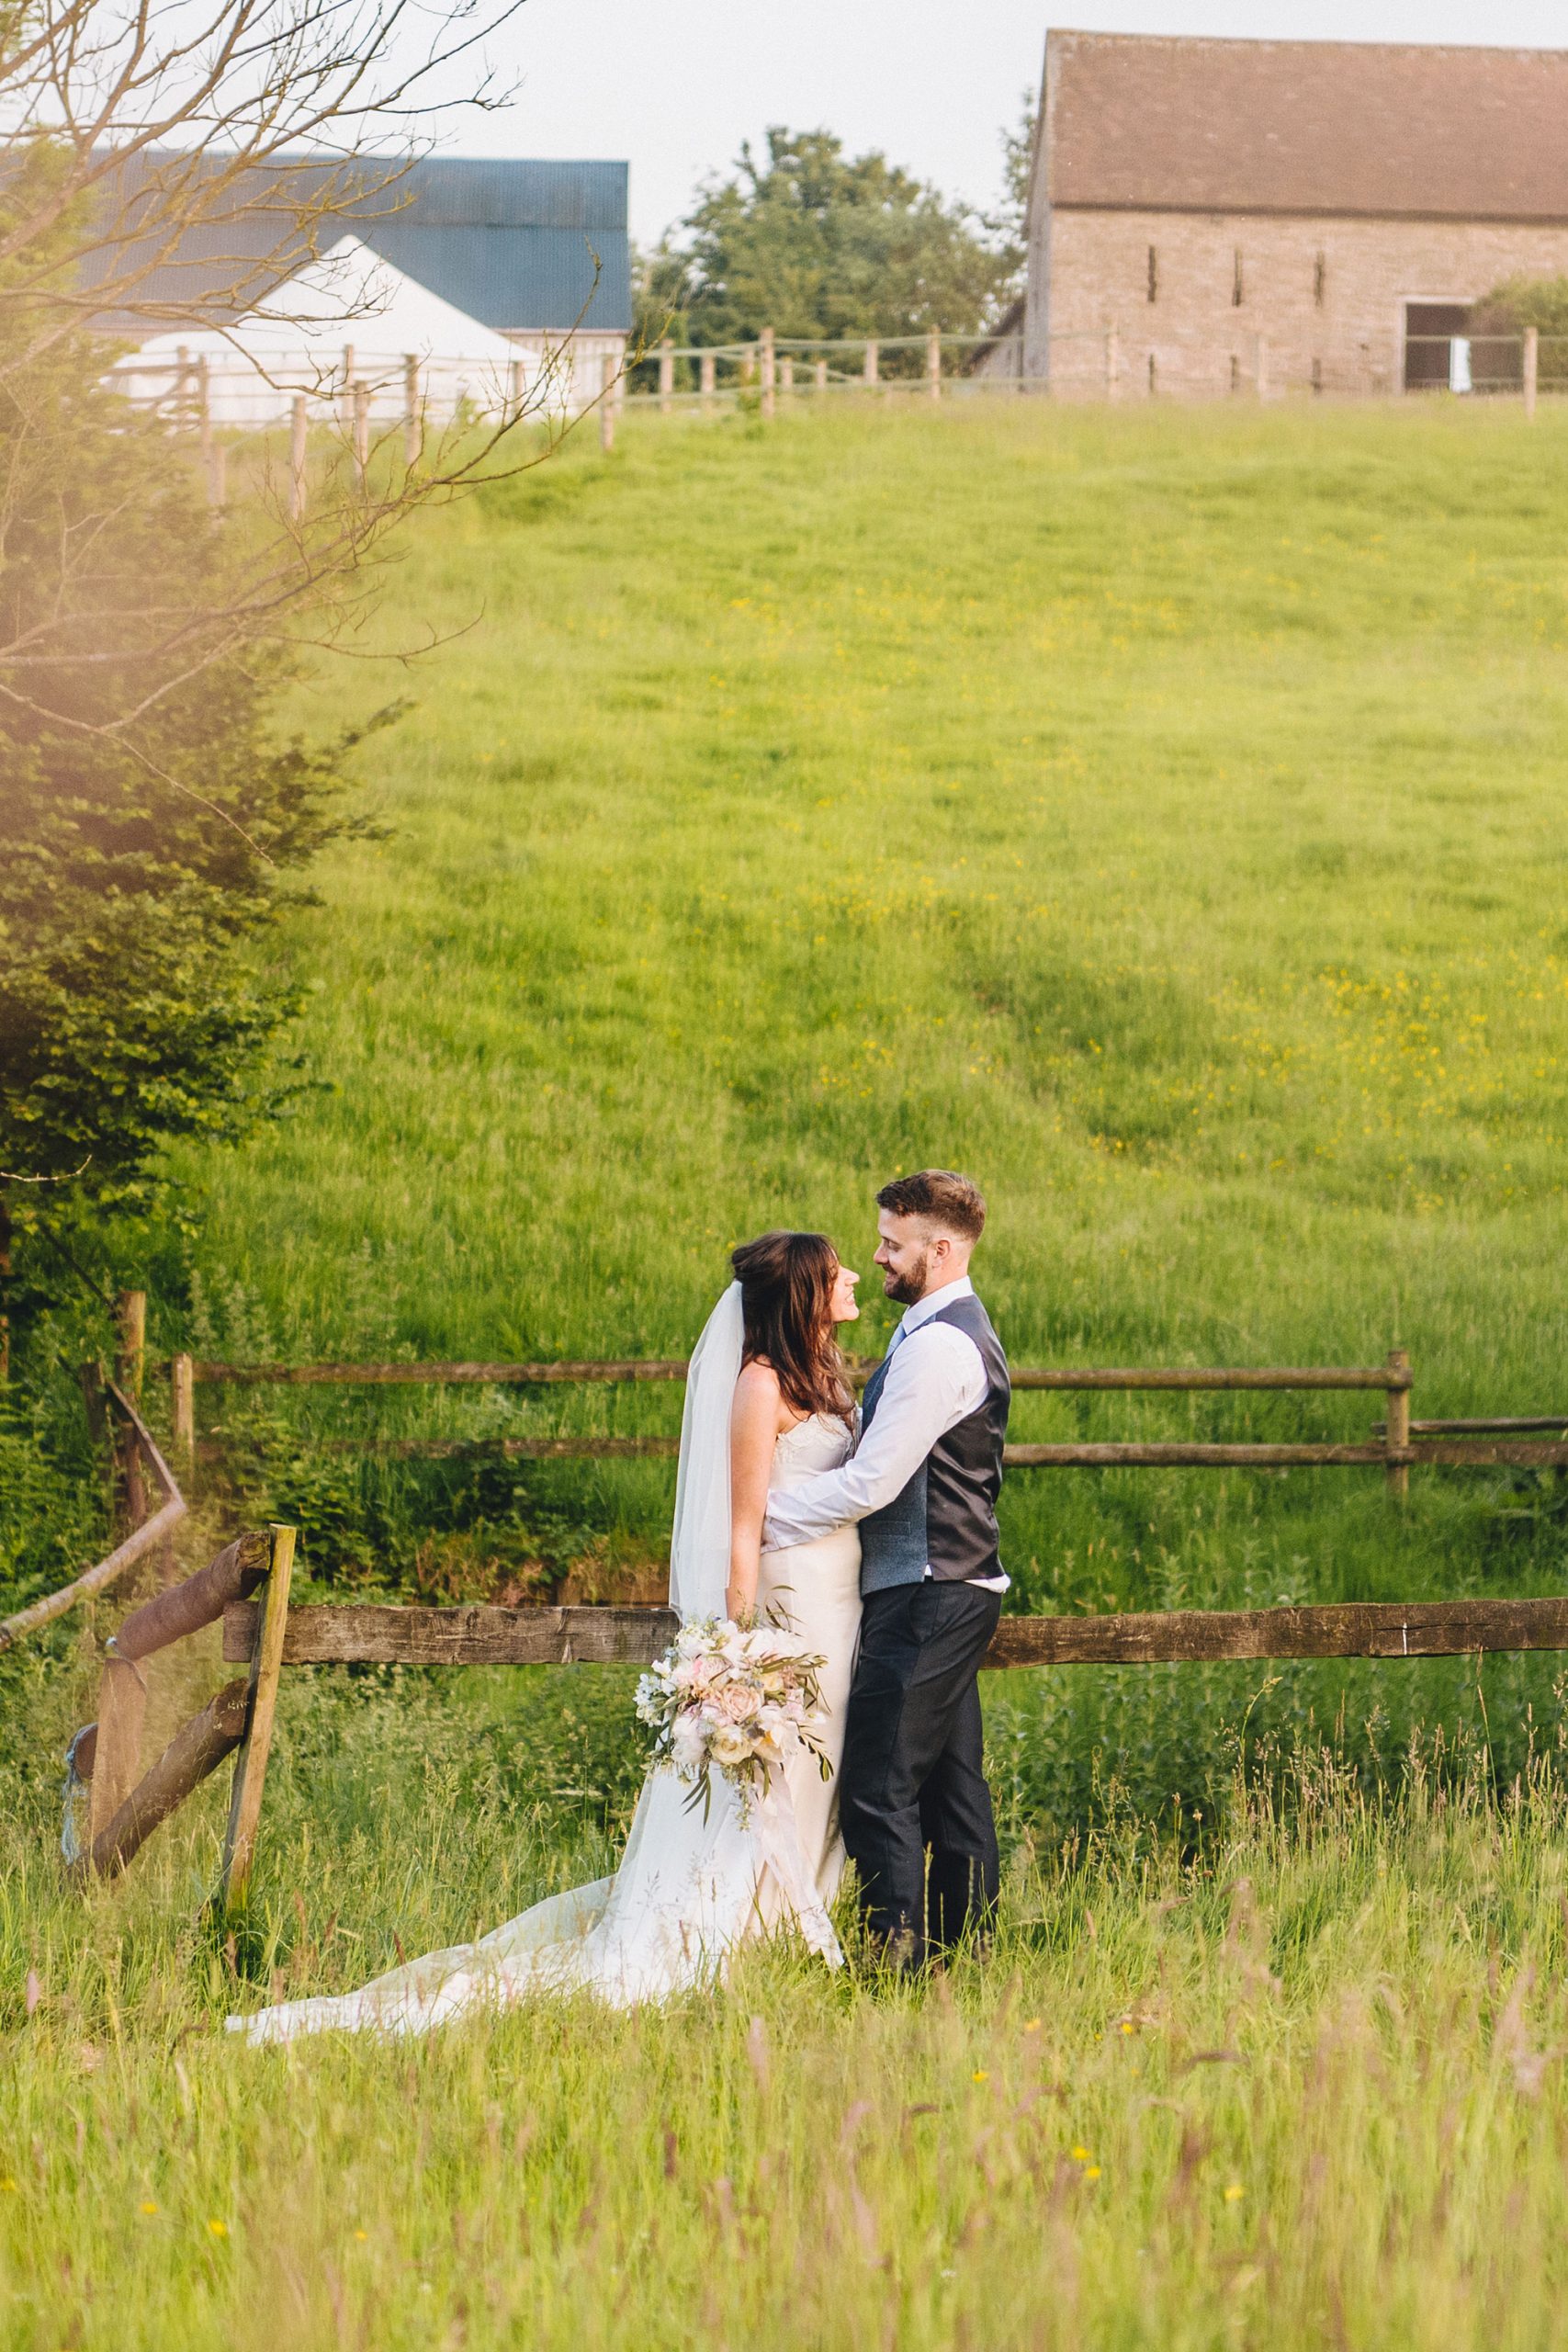 Kelly Will Rustic Country Wedding Marta May Photography SBS 037 scaled